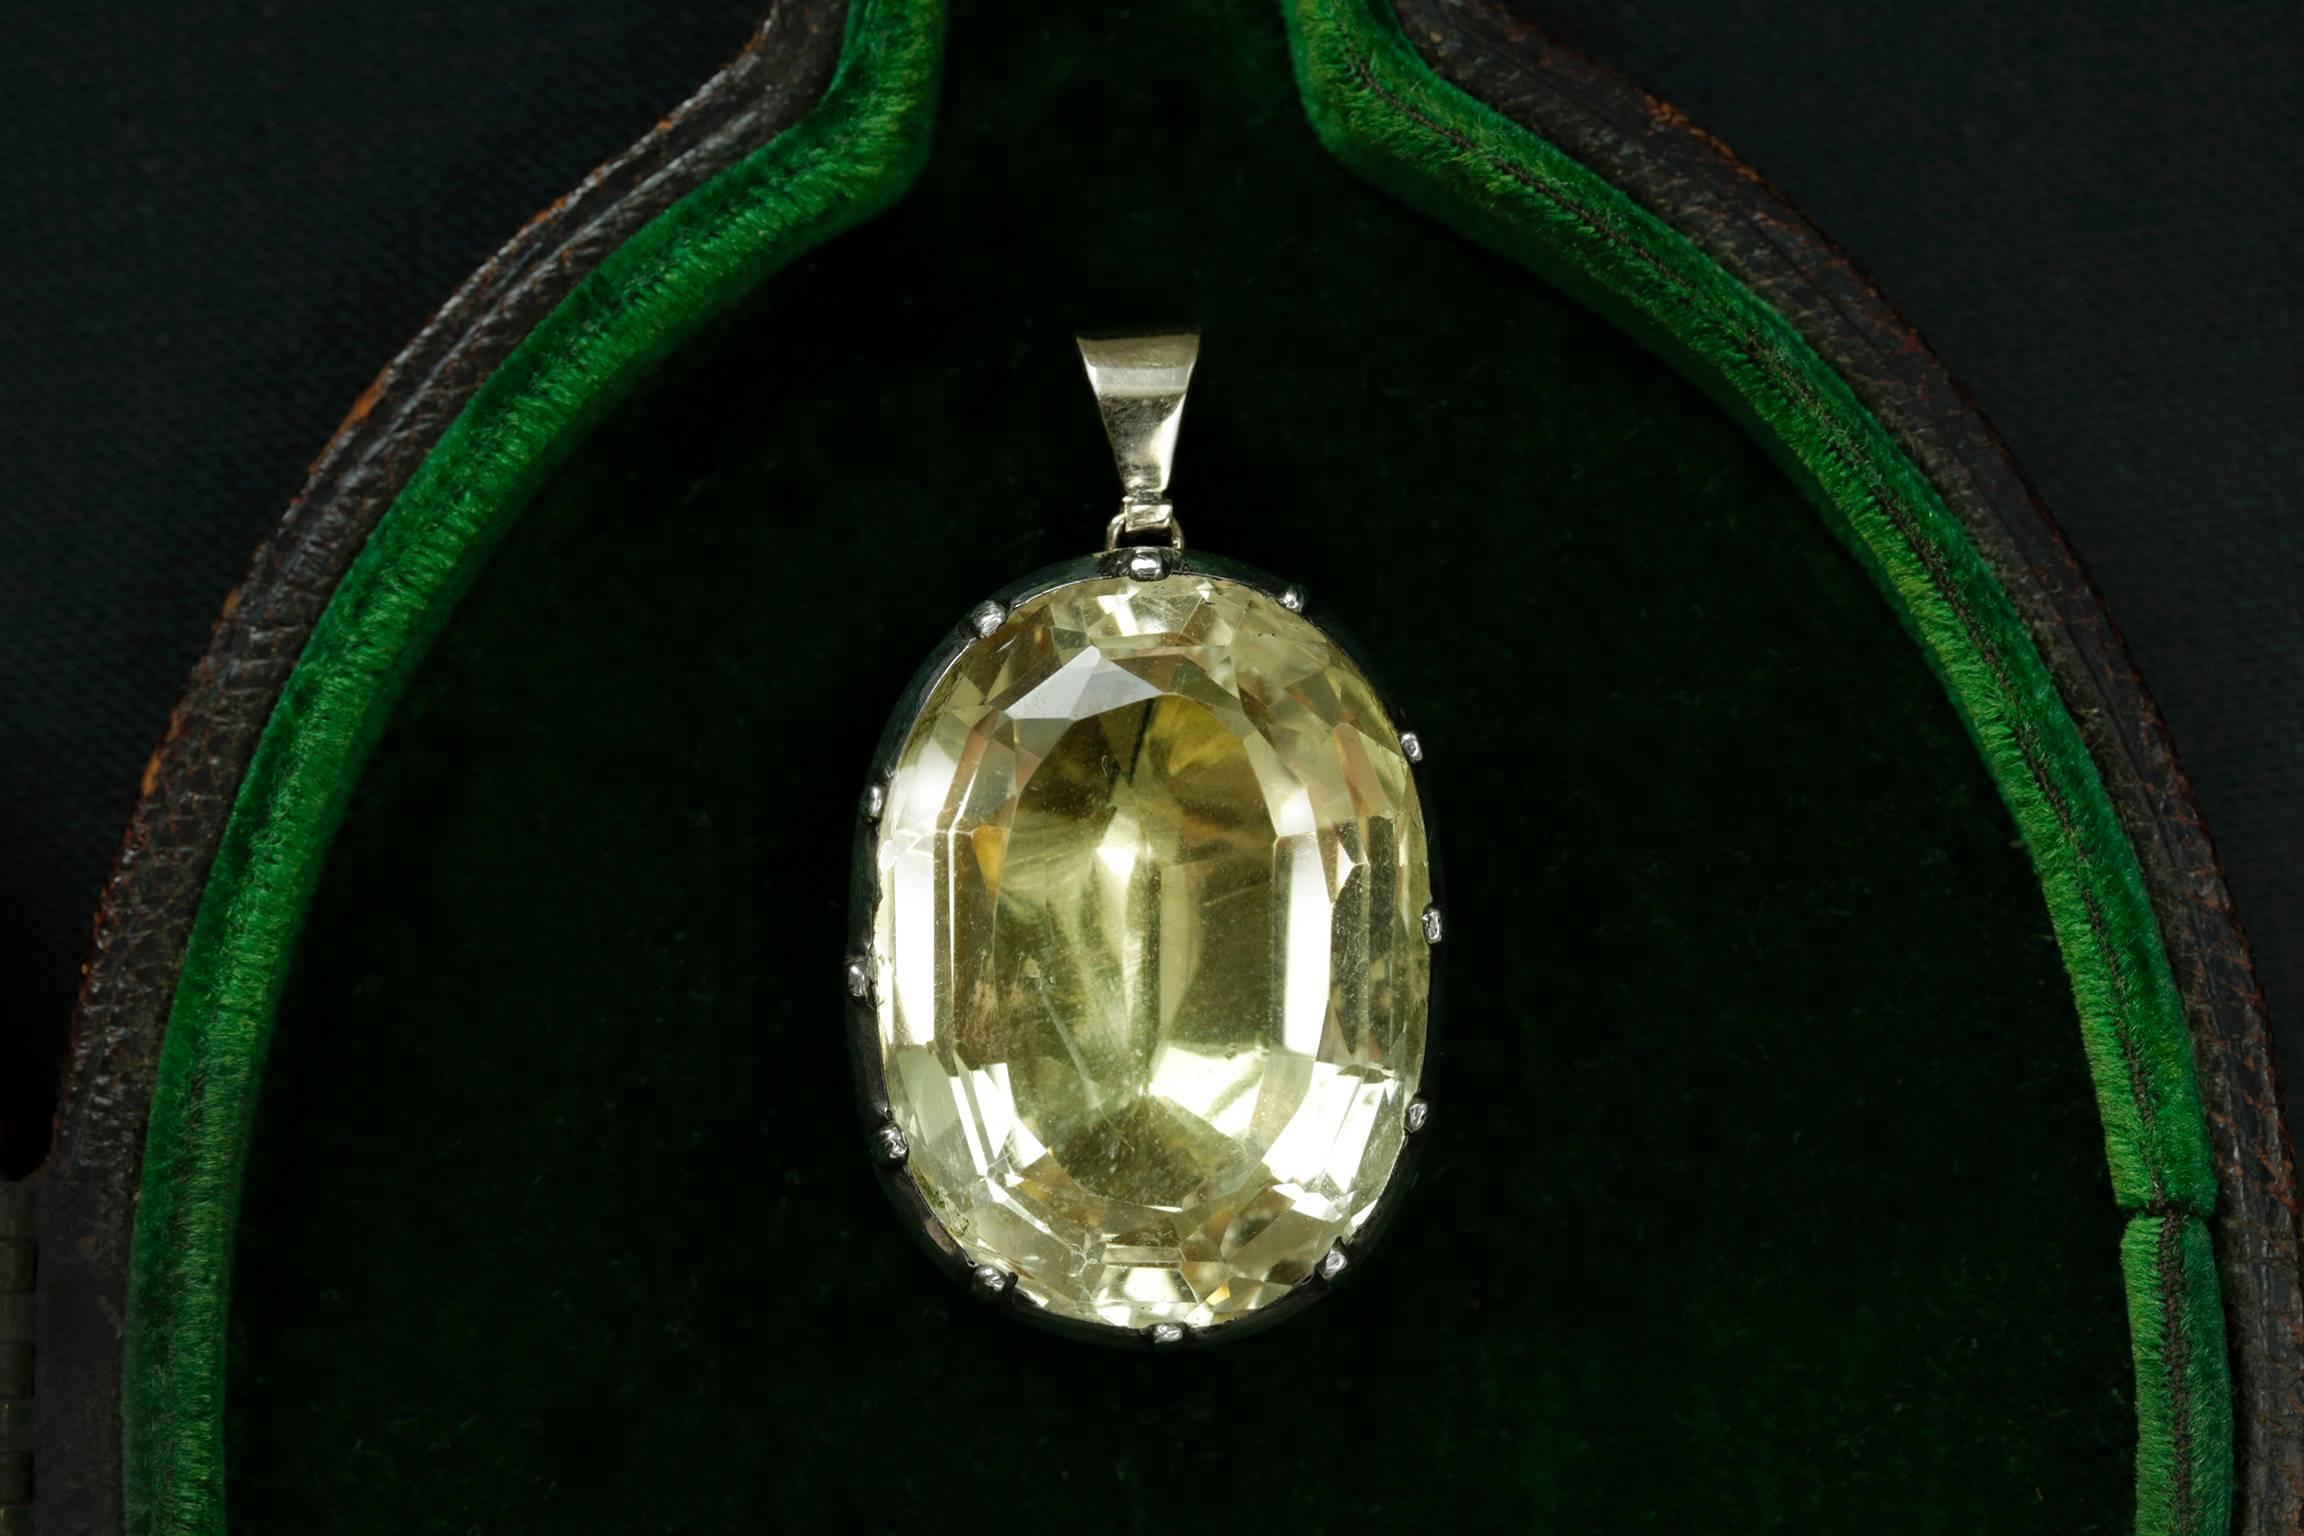 A chunky and large Georgian foiled back citrine blob pendant. A beautifully foiled citrine has the bright golden/champagne hue. The citrine is set in sterling silver, and the bale is 15k yellow gold. There is no water damage, and the pendant is in